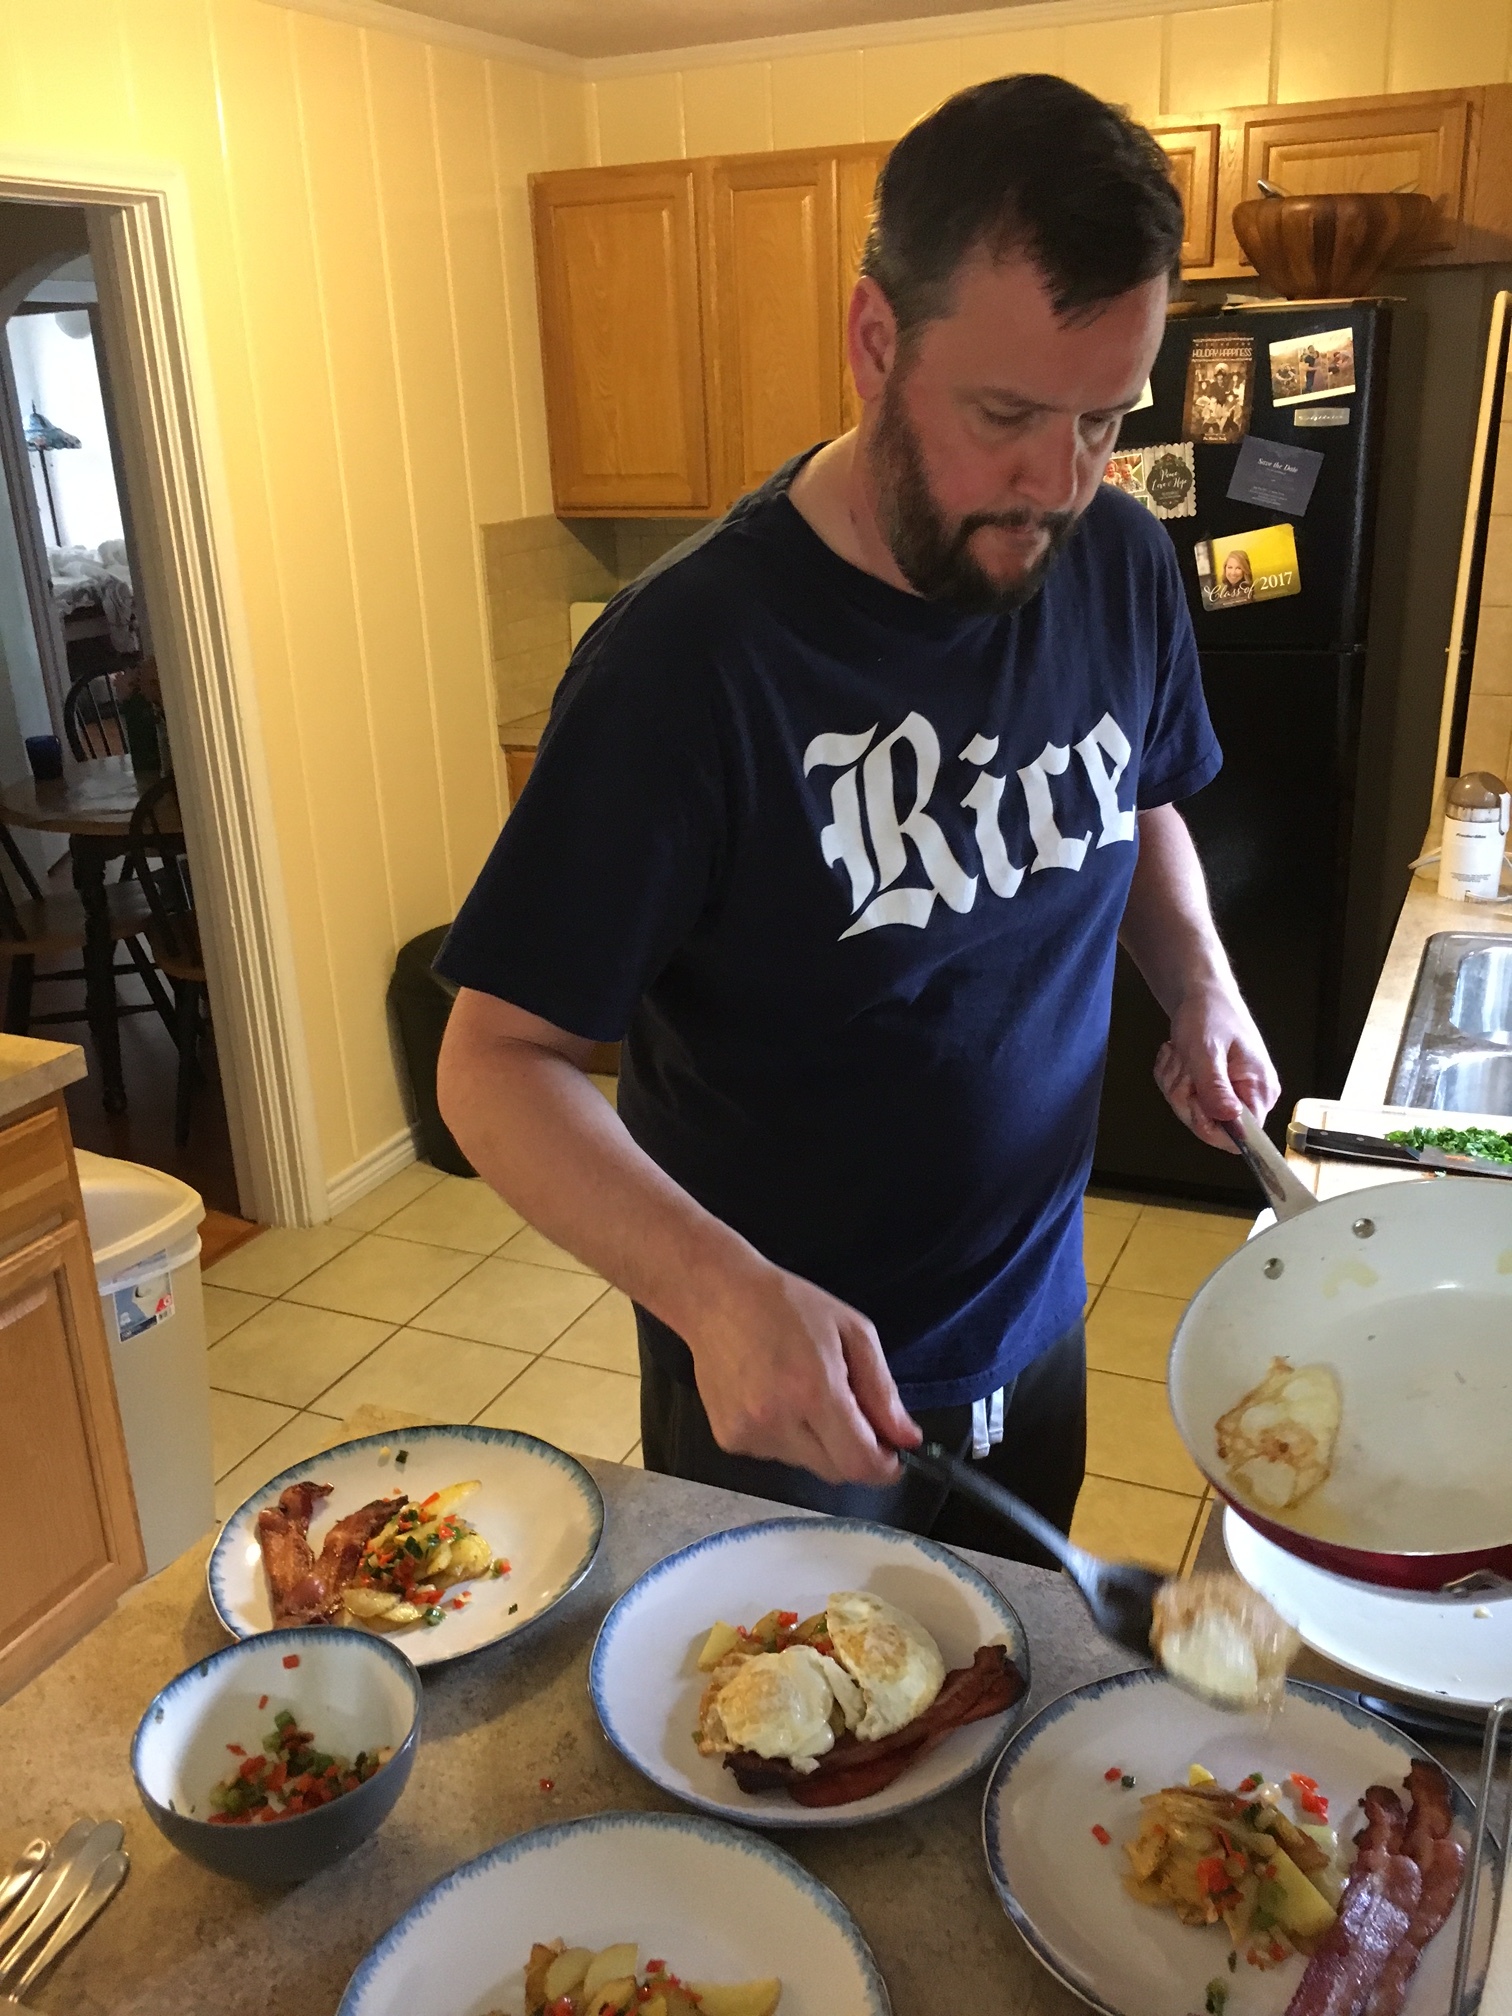 no matter where his kids are, Dad makes them breakfast